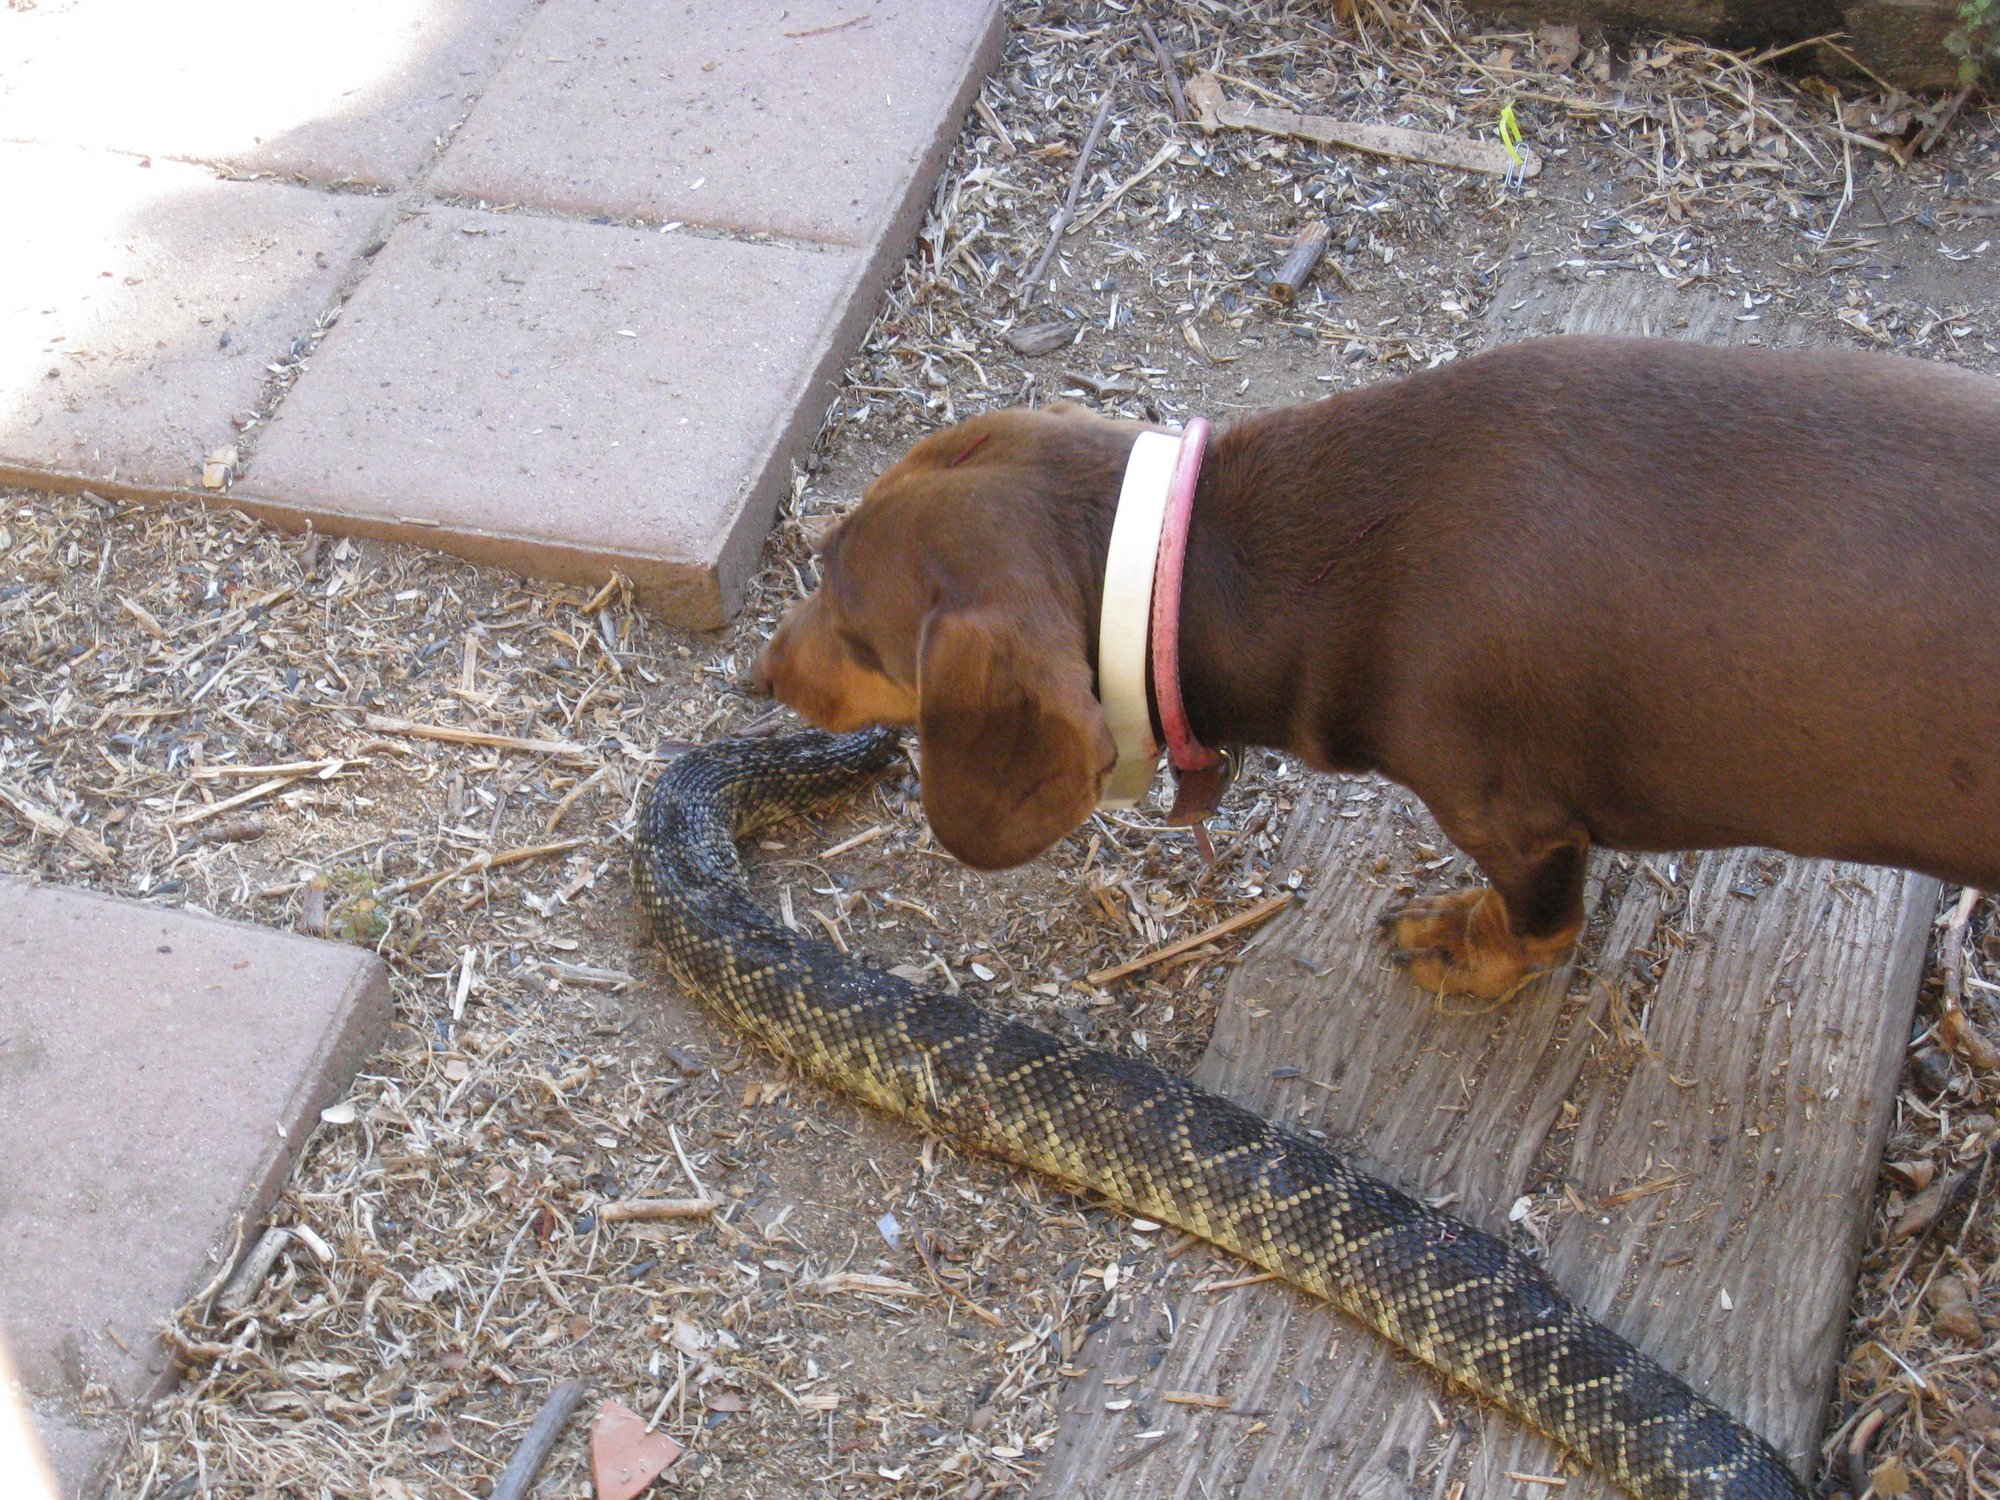 A dachshund sniffing a dead snake